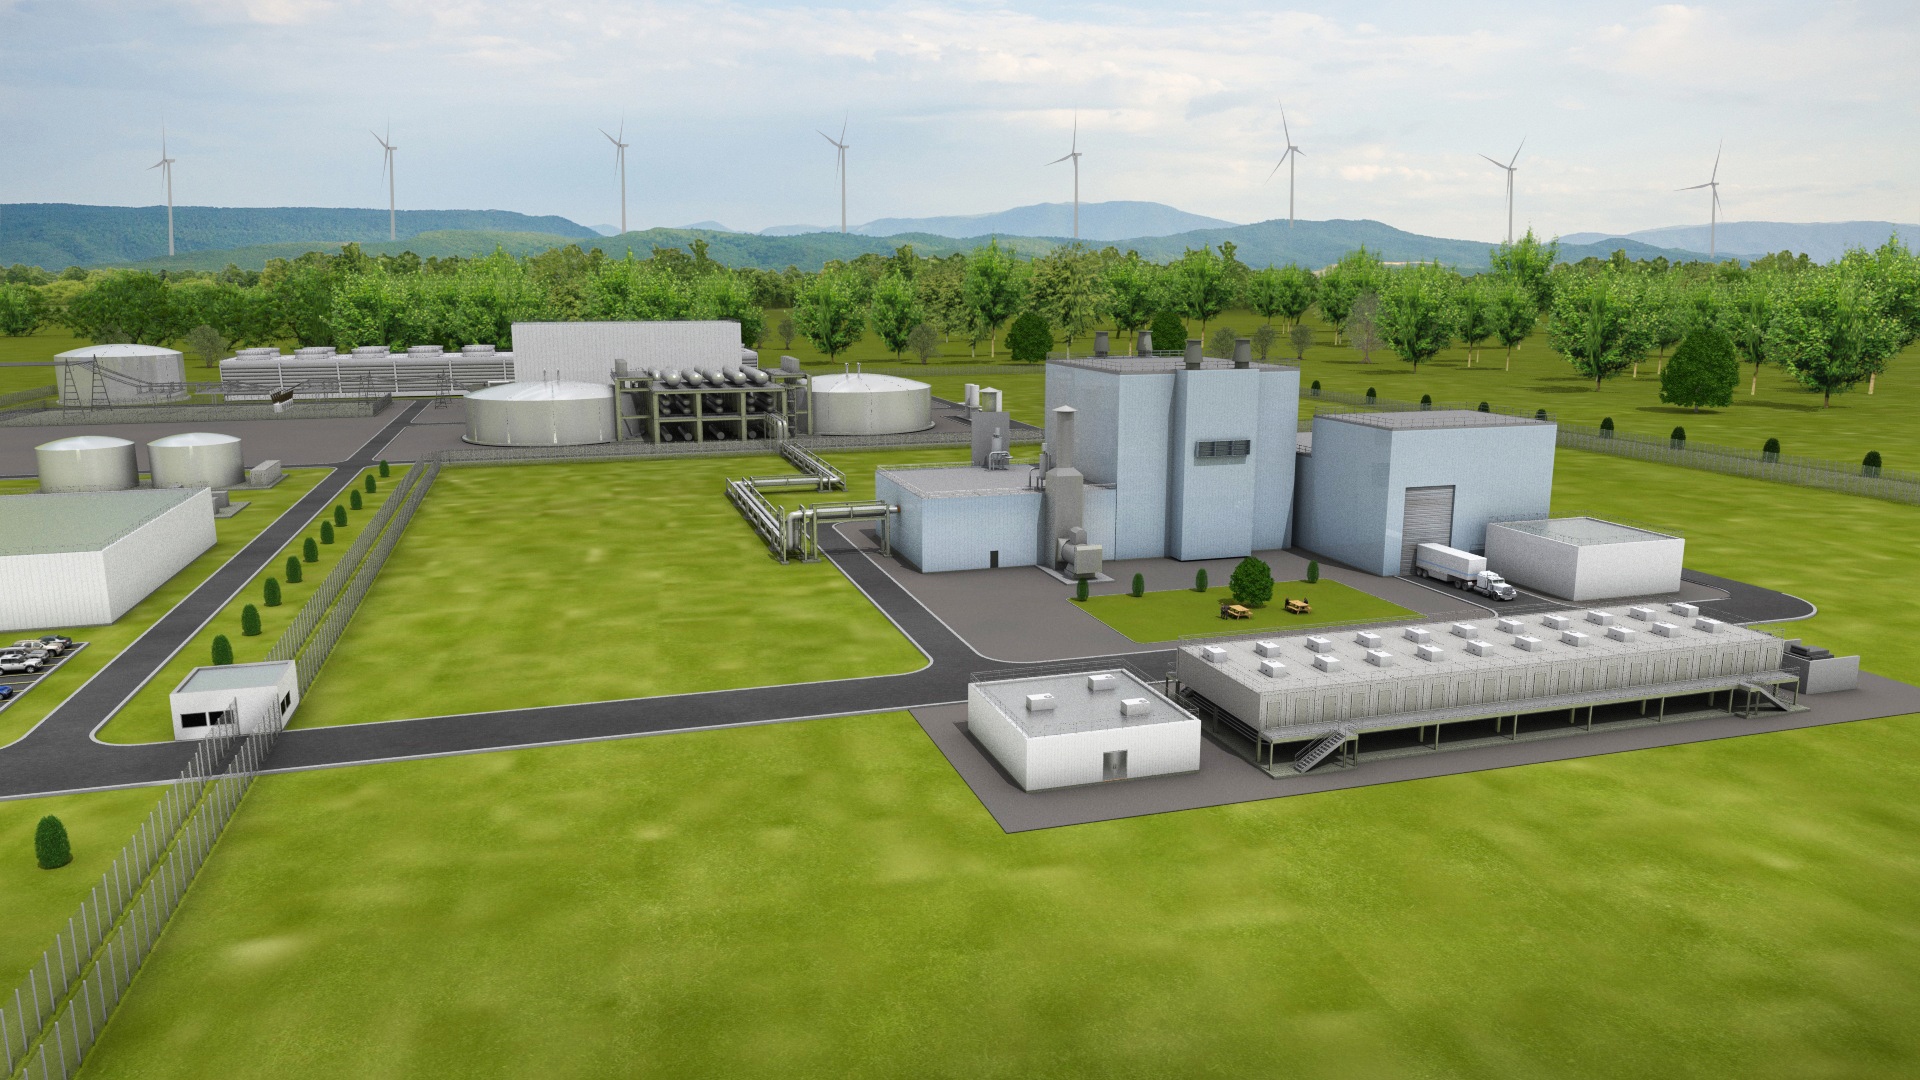 U.S. Department of Energy Awards TerraPower $80 Million to Demonstrate Advanced Nuclear Technology